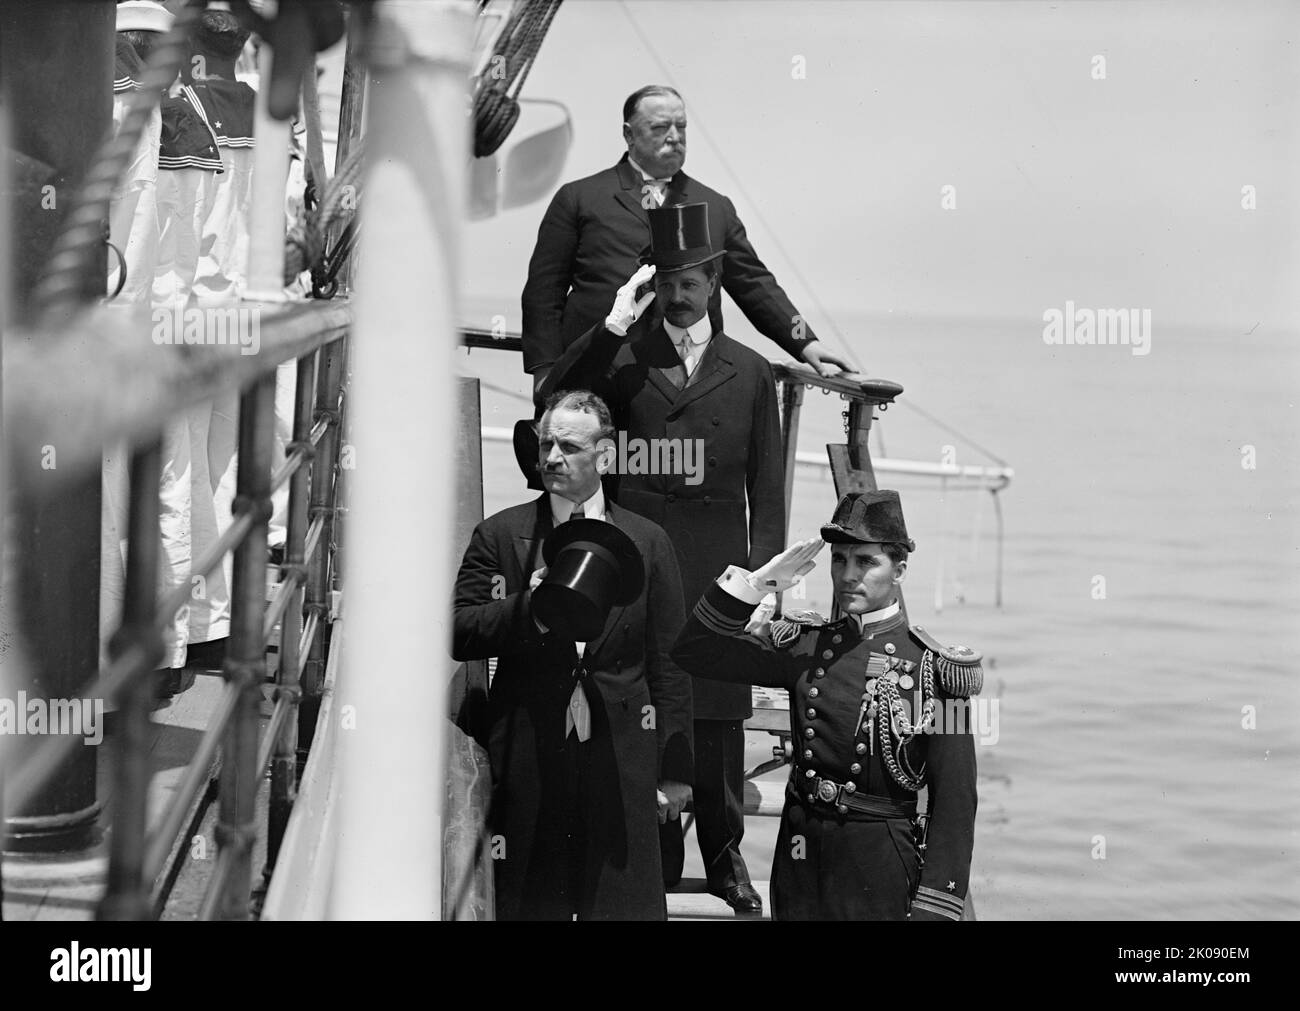 German Squadron Visit To U.S. President Taft And Party Leaving 'Mayflower' - Top Downwards: Taft; Meyer; Amb. Count Bernstorff; Comdr. Powers Symington, 1912. Stock Photo